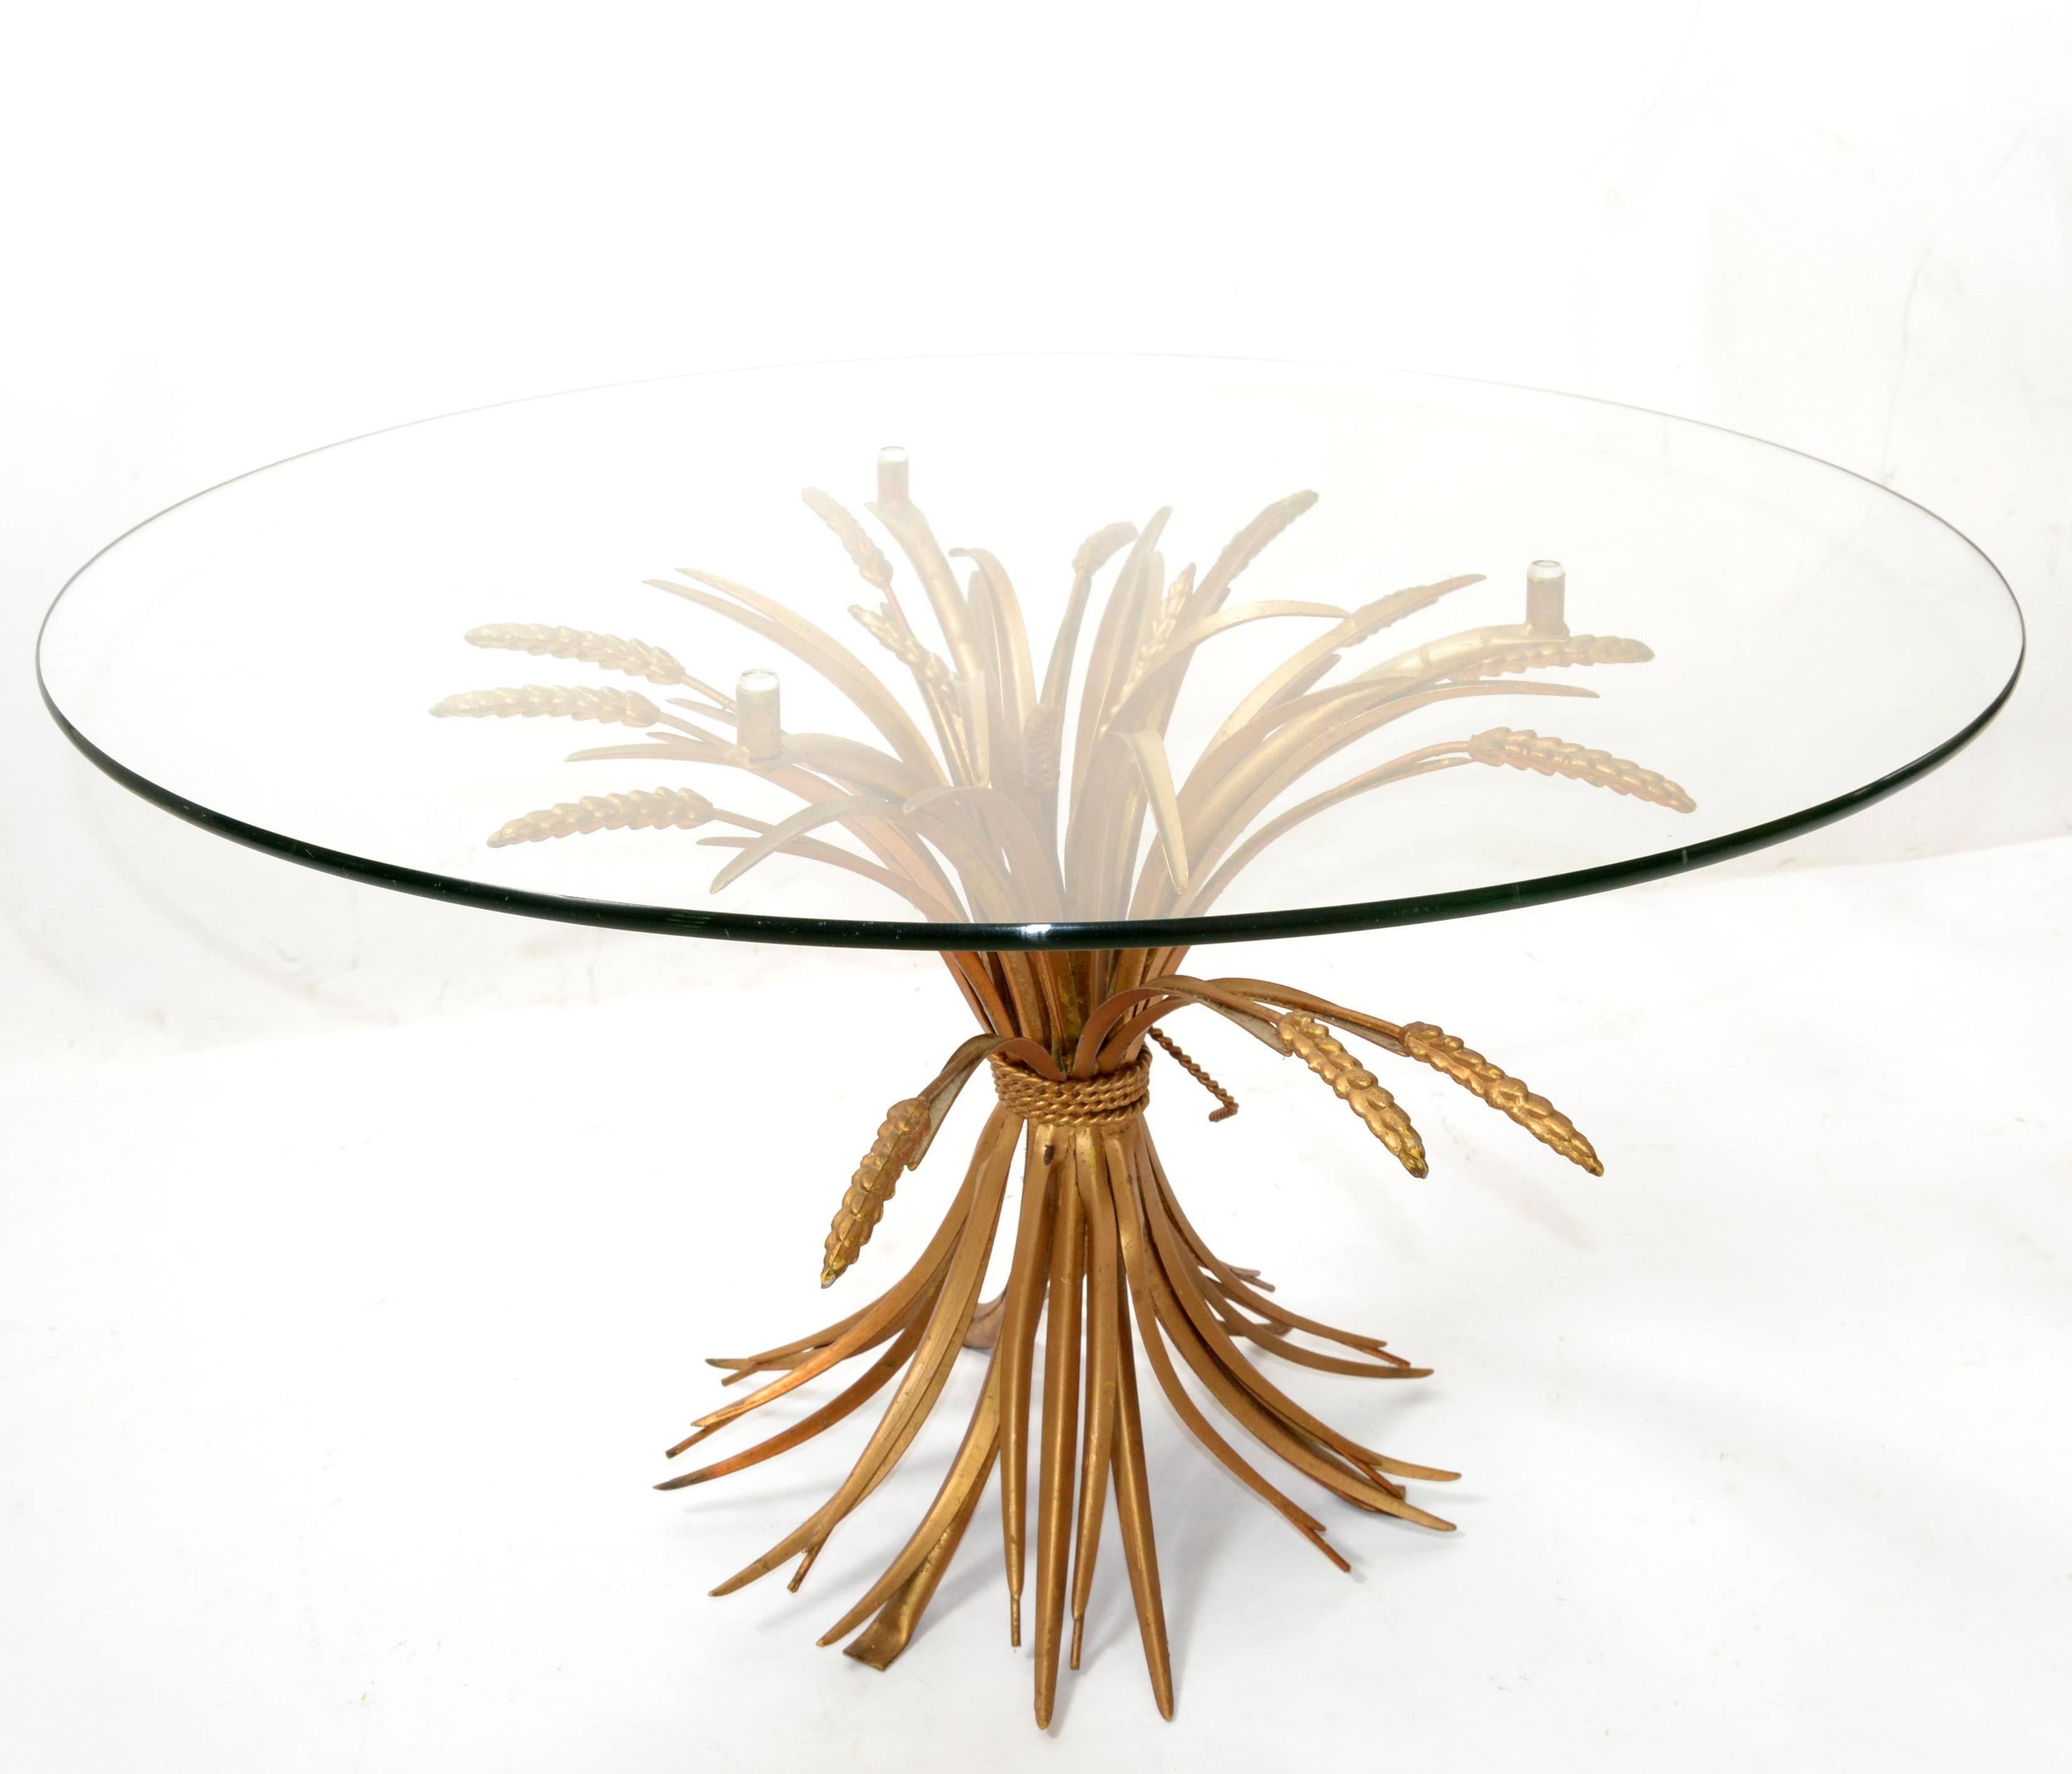 Hollywood Regency coco chanel style coffee table in gilt iron sheaf of wheat with glass top.
This table was made in Italy in the 1960s and shows a lot of patina.
The round glass top has some minor wear such as scratches due to History.